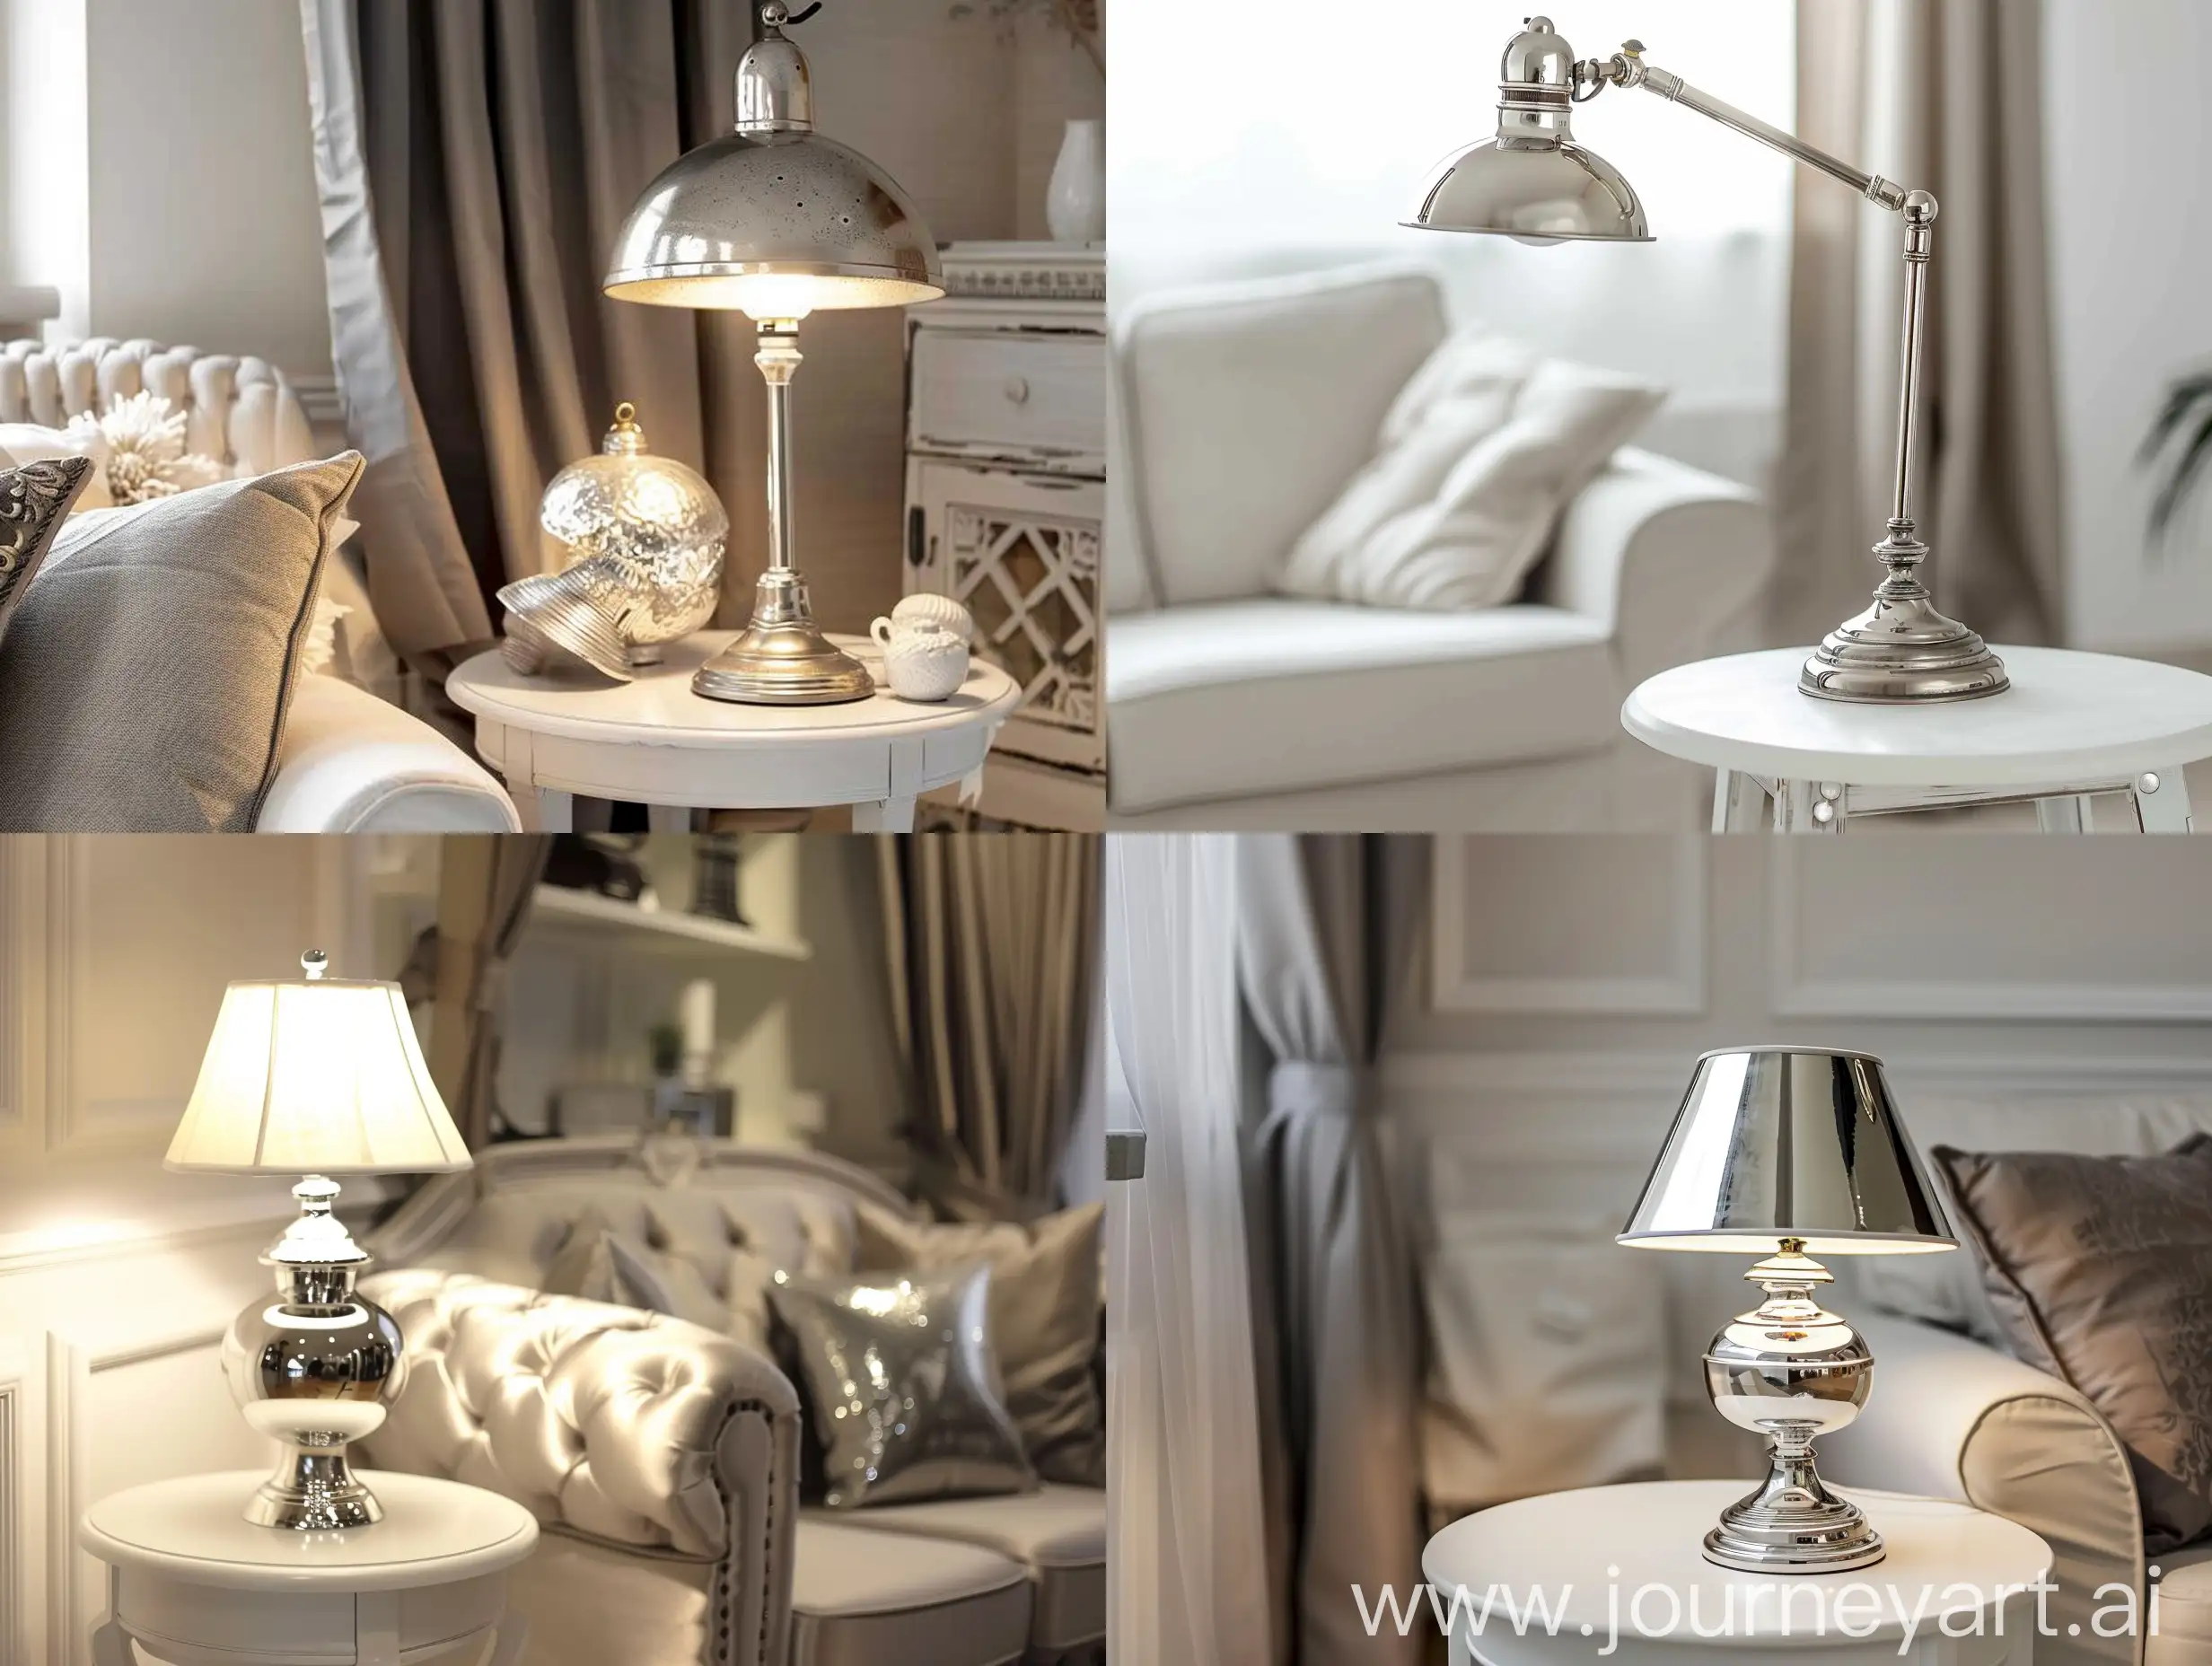 Vintage-Silver-Lamp-Adorning-White-Table-in-Cozy-Living-Room-Interior